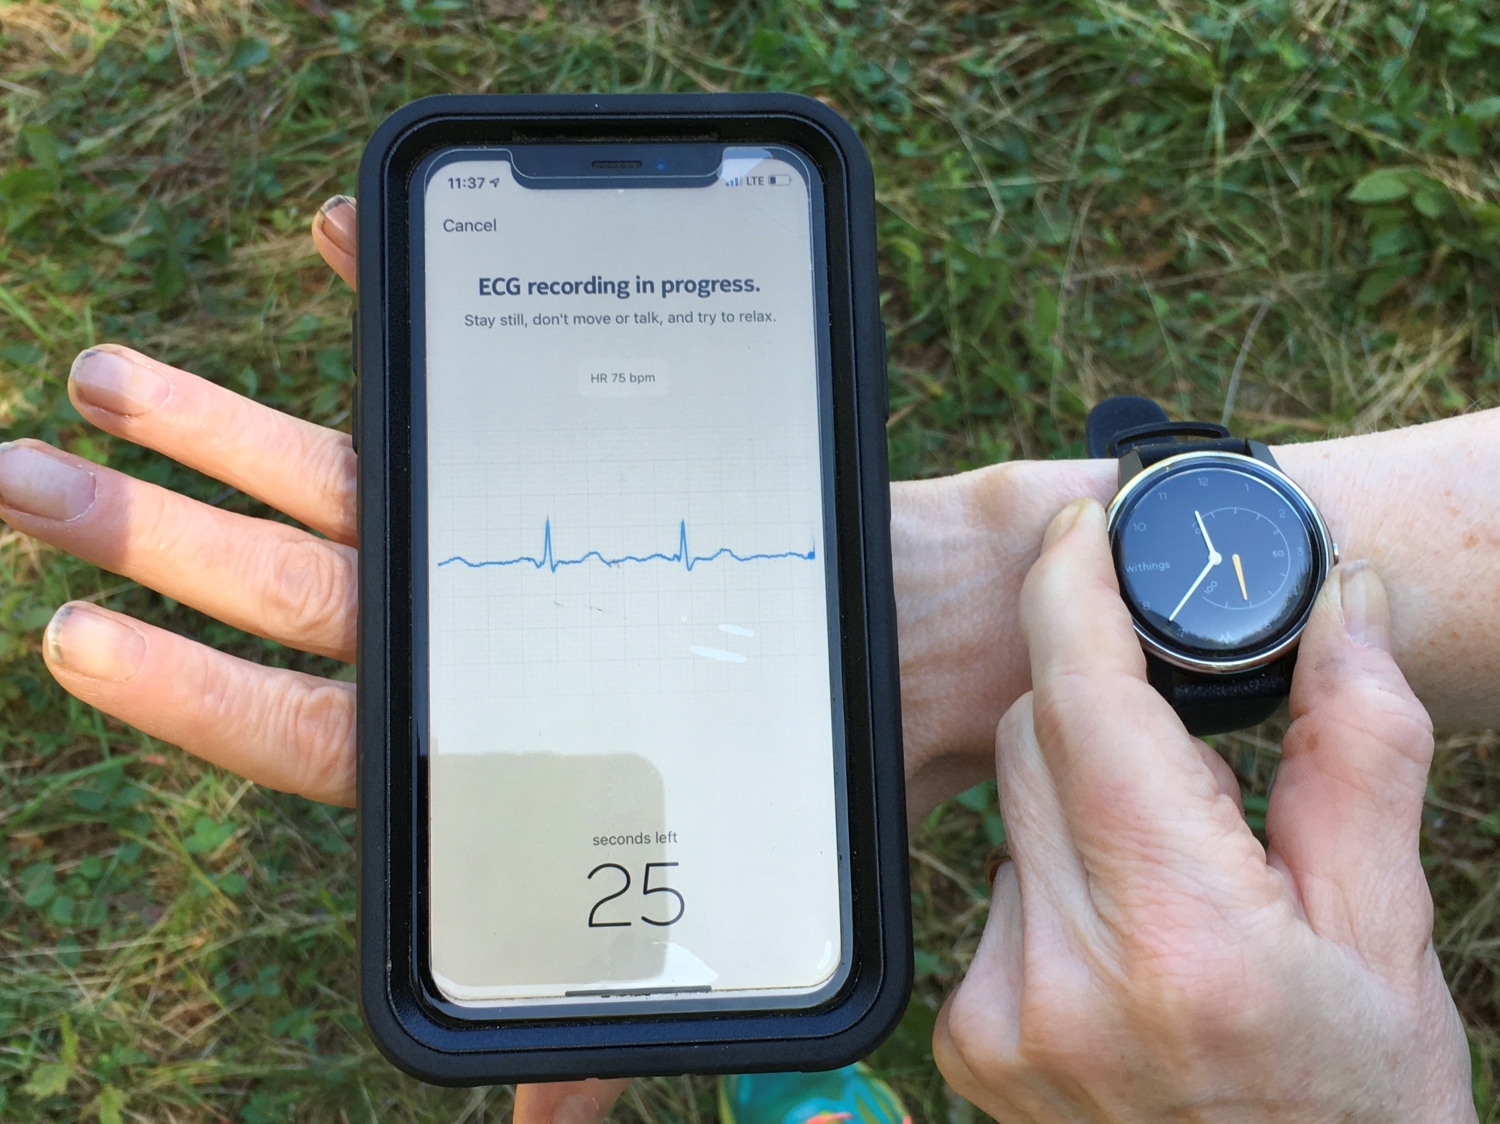 https://www.digitaltrends.com/wp-content/uploads/2019/09/withings-move-ecg-app-test.jpg?fit=1500%2C1124&p=1